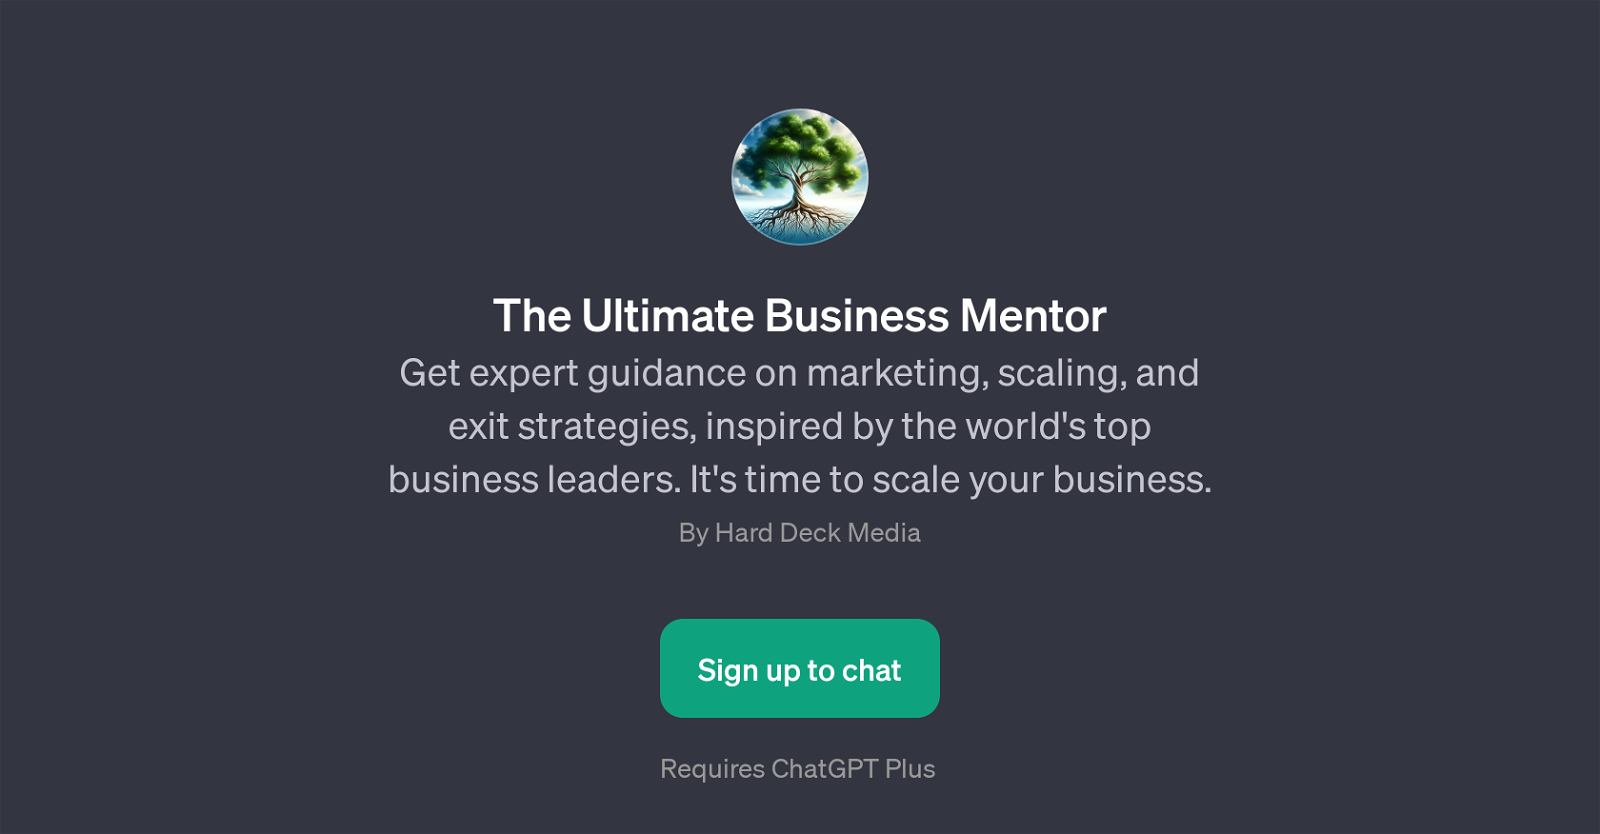 The Ultimate Business Mentor website